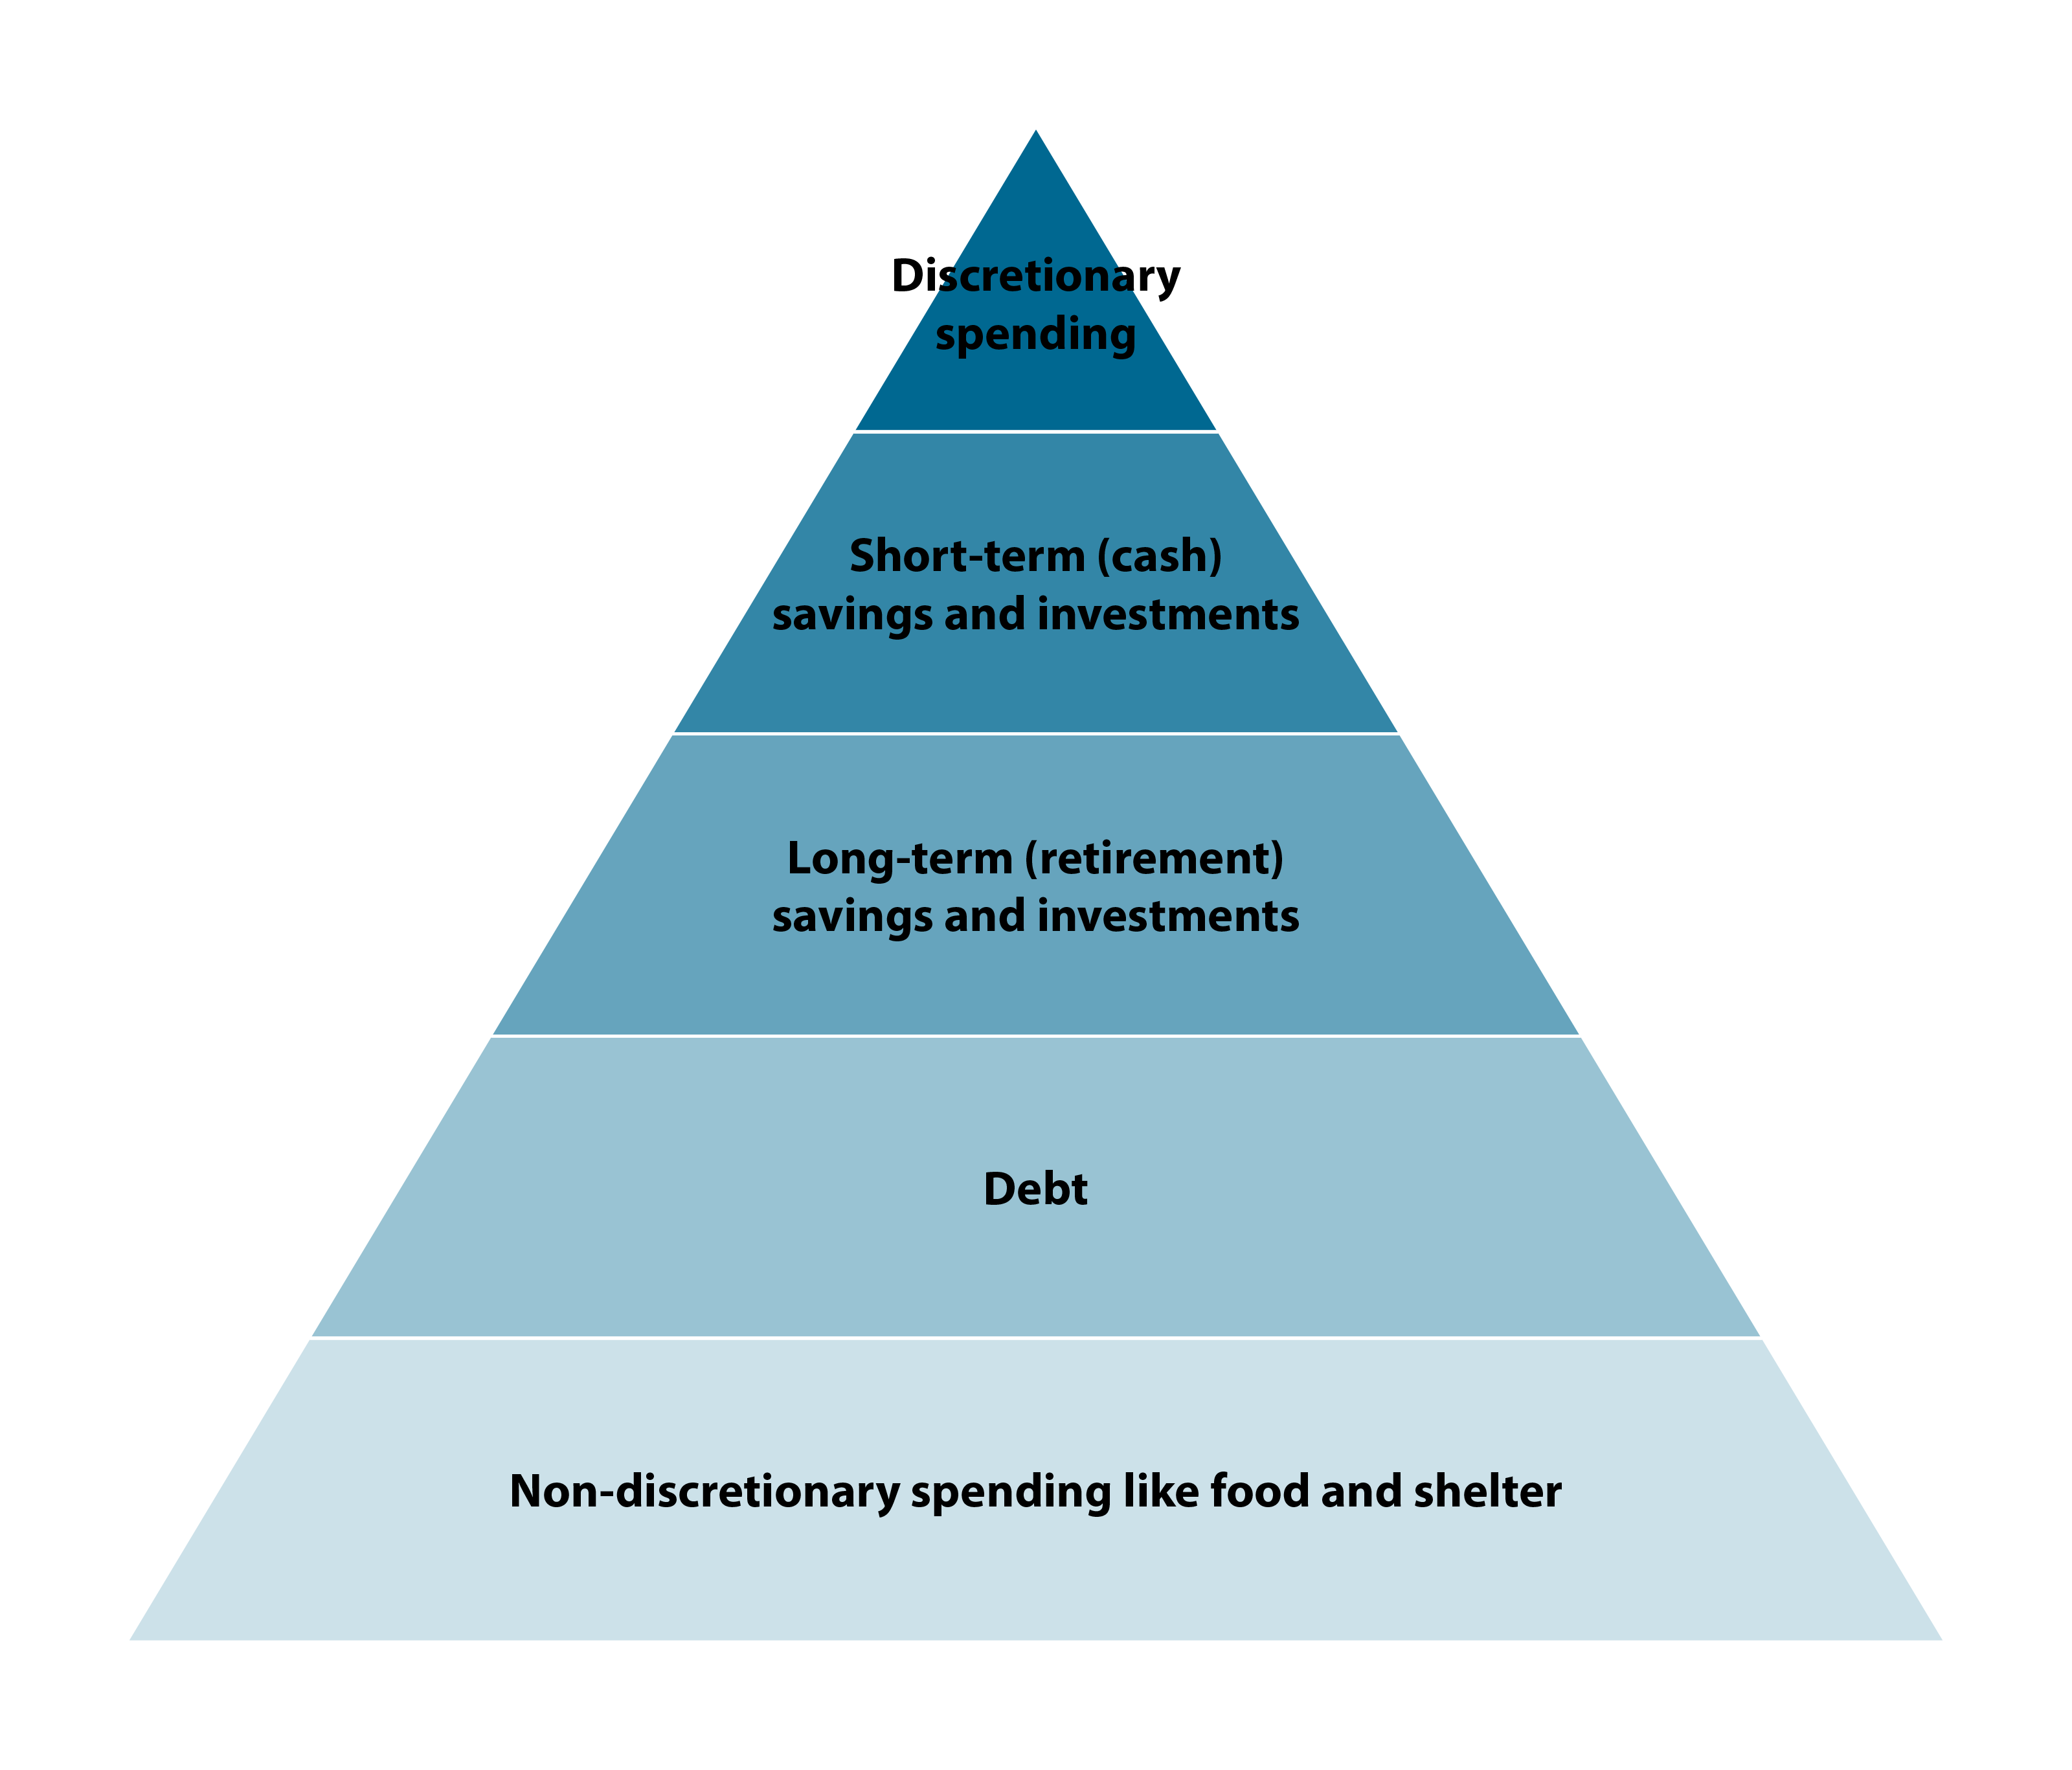 Financial Planning Pyramid showing (from bottom to top): Non-discretionary spending like food and shelter, debt, long-term (retirement) savings and investments, short-term (cash) savings and investments, discretionary spending